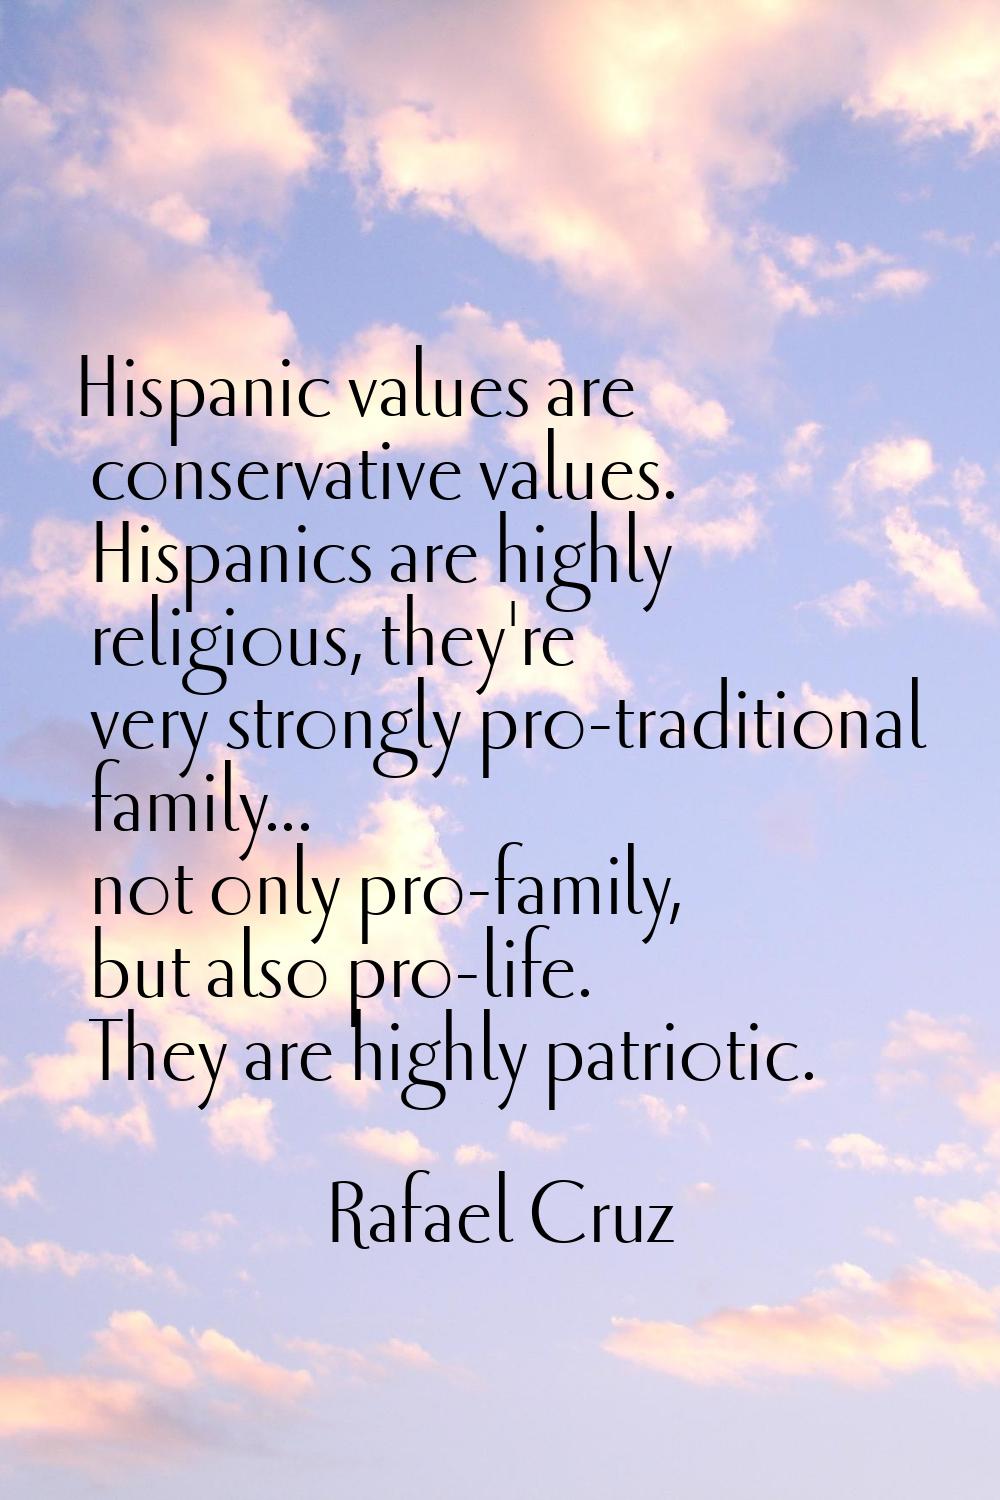 Hispanic values are conservative values. Hispanics are highly religious, they're very strongly pro-